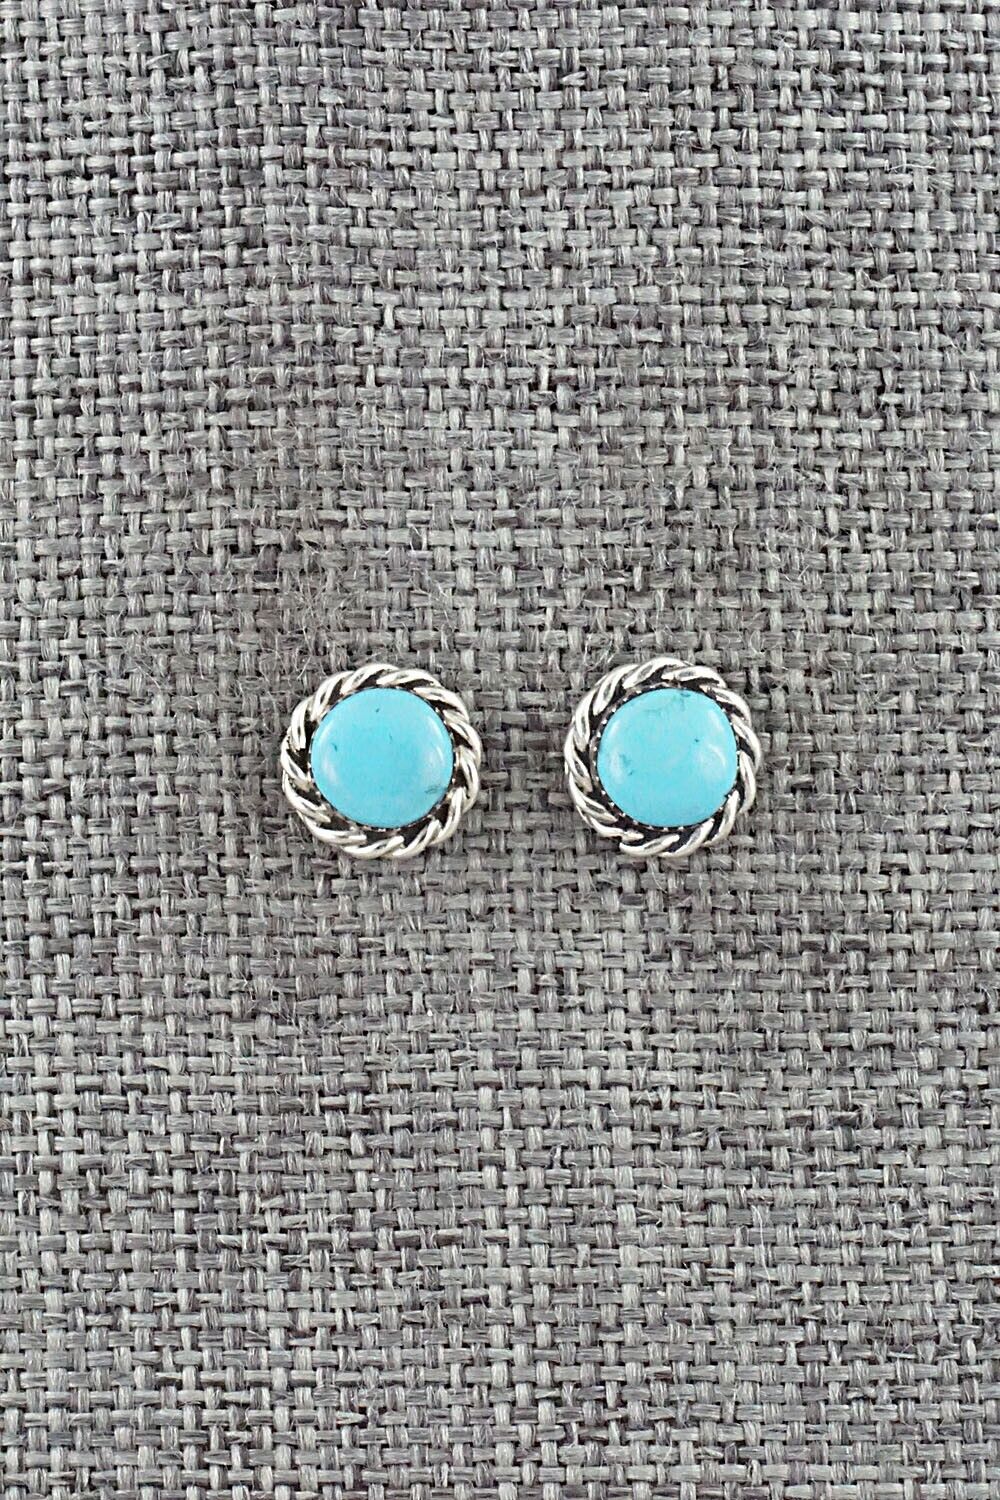 Turquoise & Sterling Silver Earrings - Leander Cachini